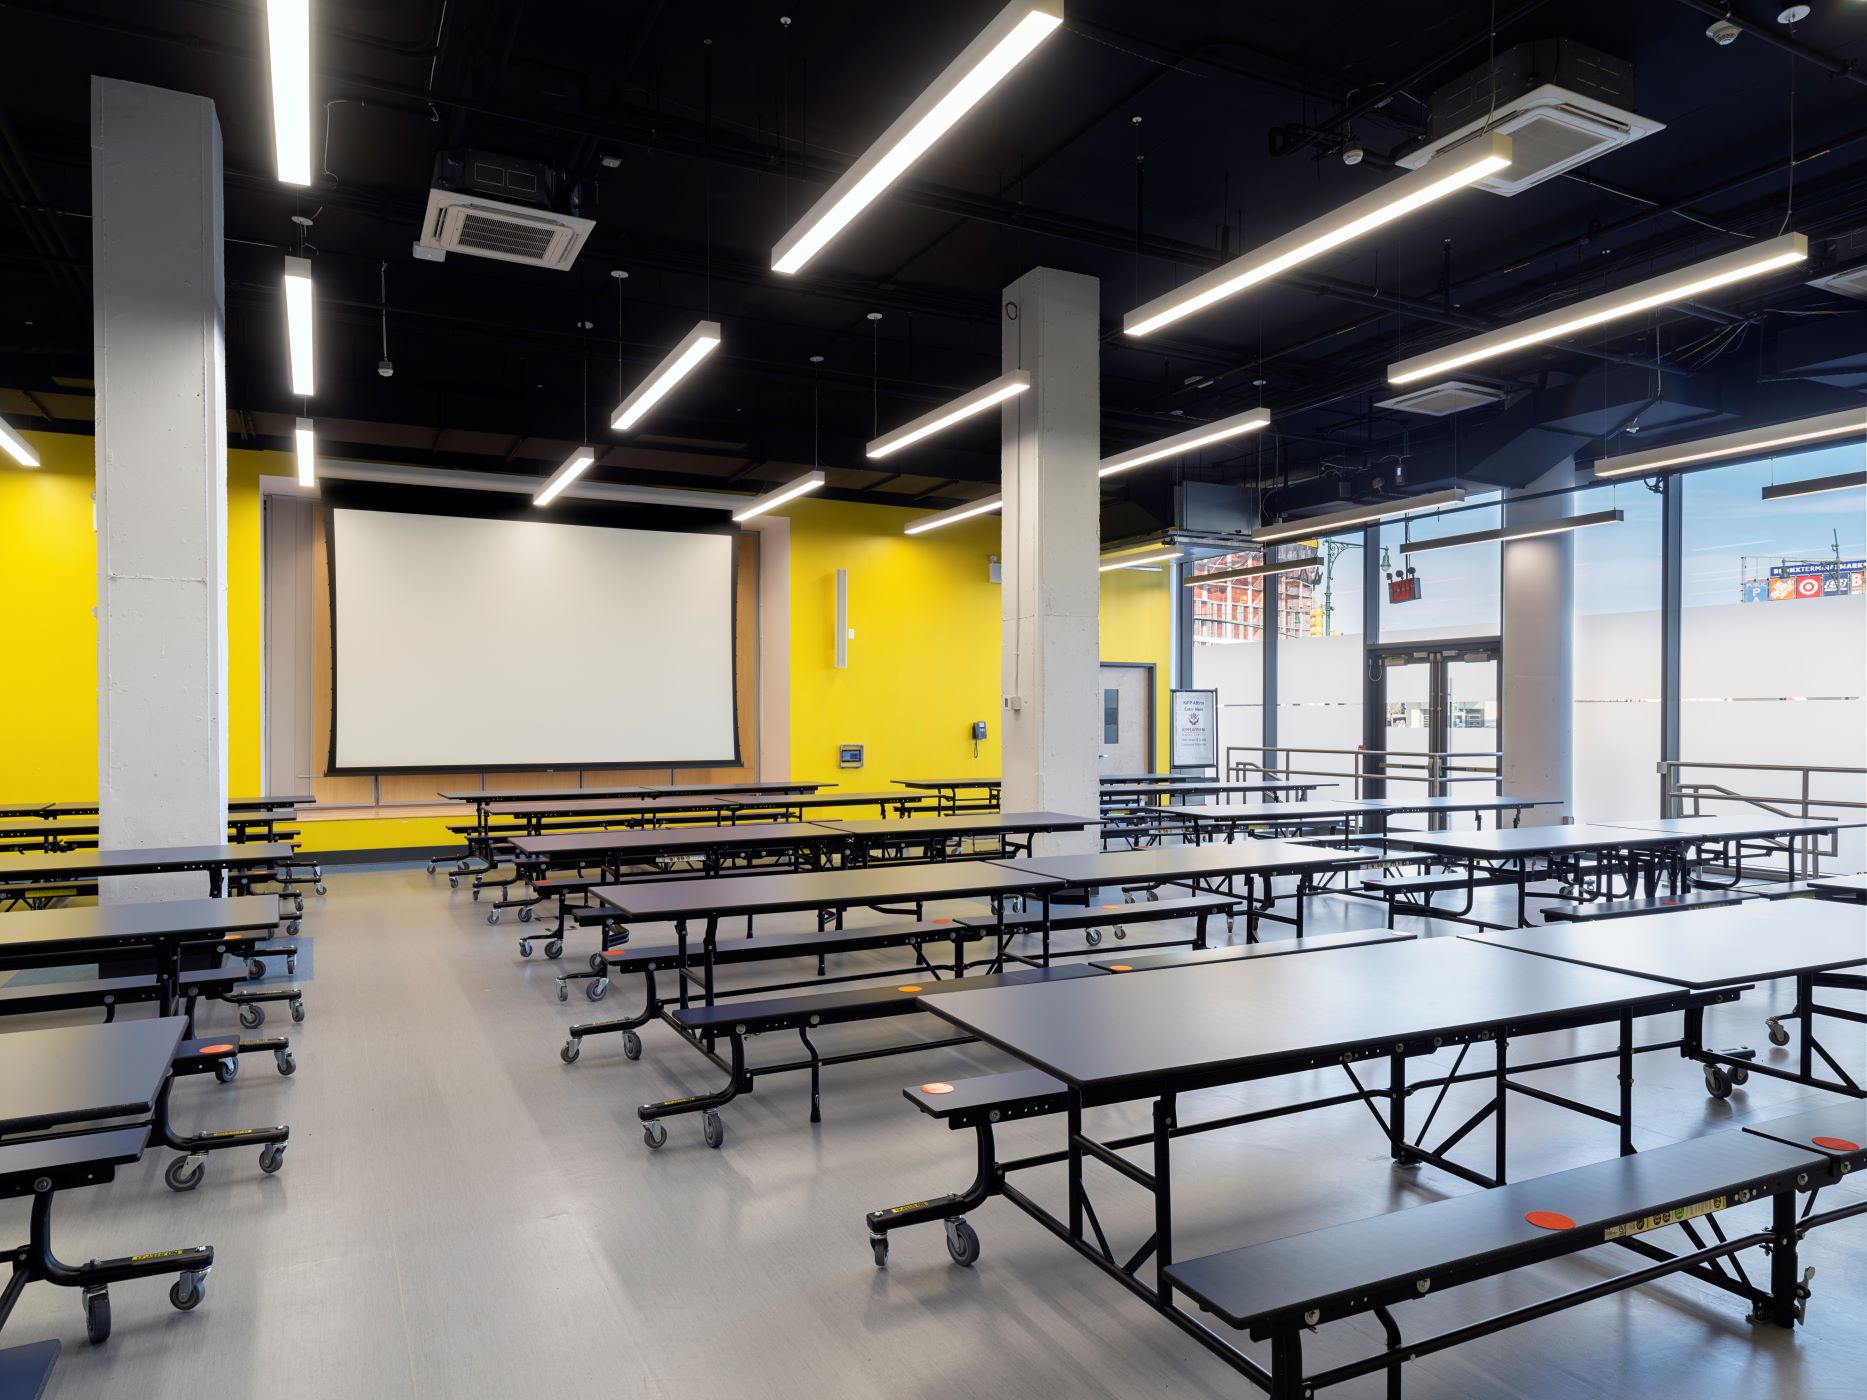 cafeteria in a school with a bright yellow wall